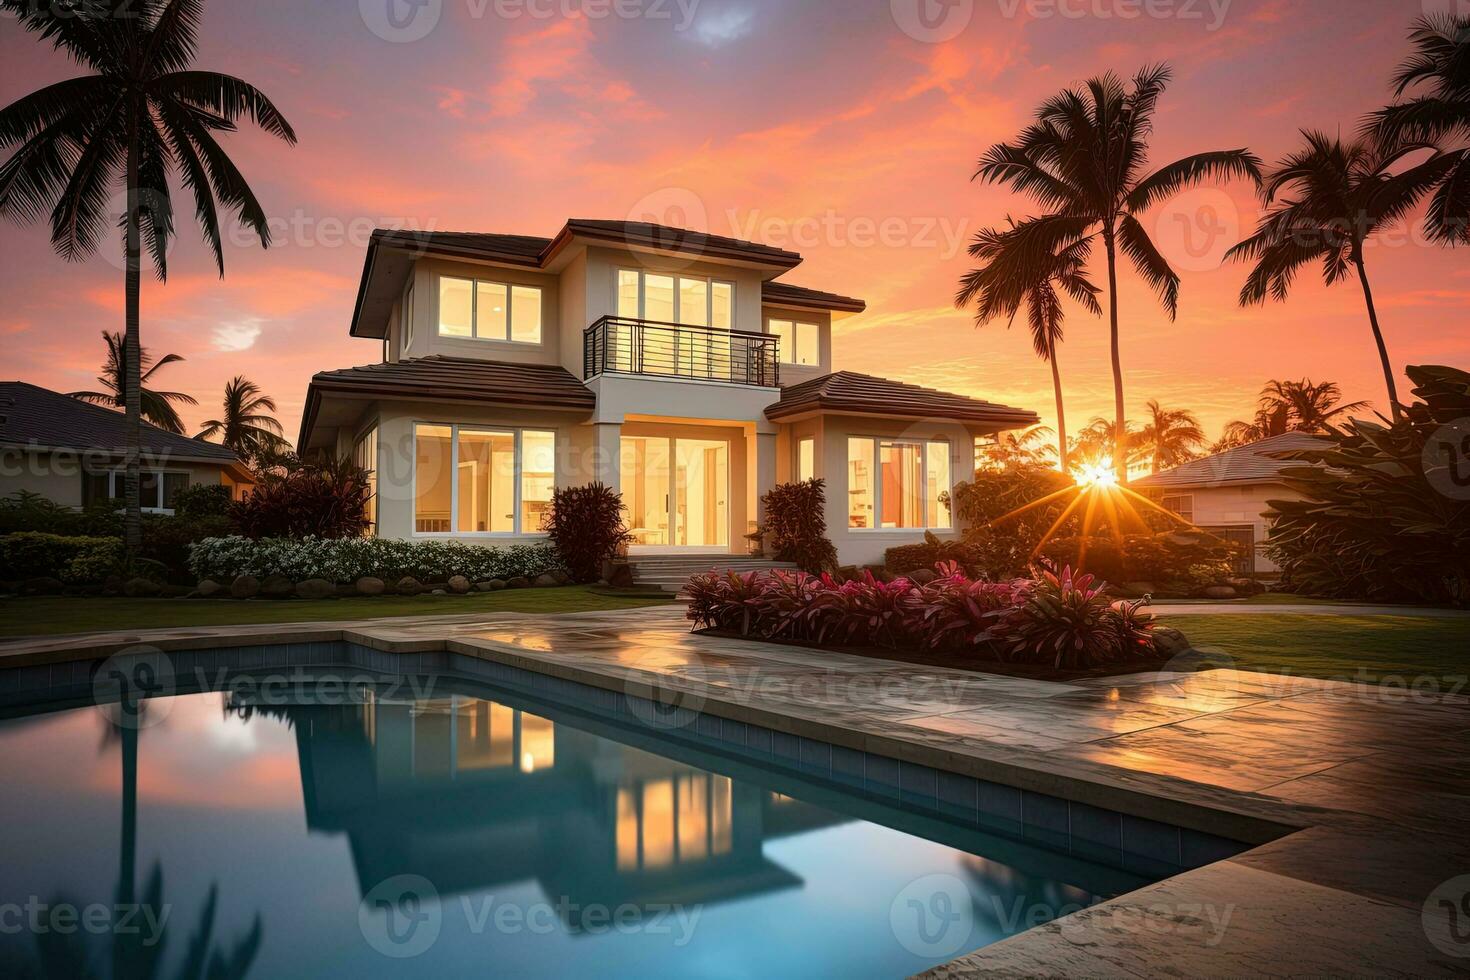 Big country house with pool and palm trees around on a sunset background. Real estate concept photo